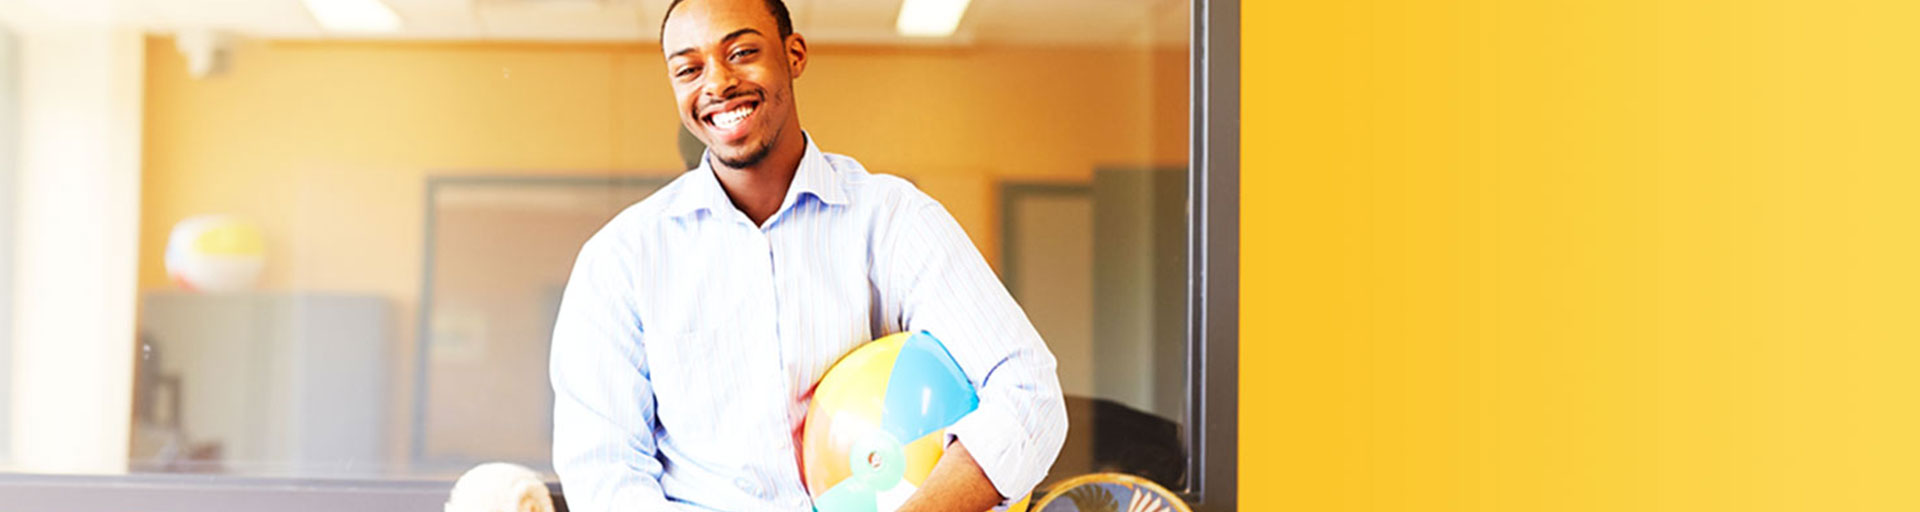 male holding a beach ball in classroom setting